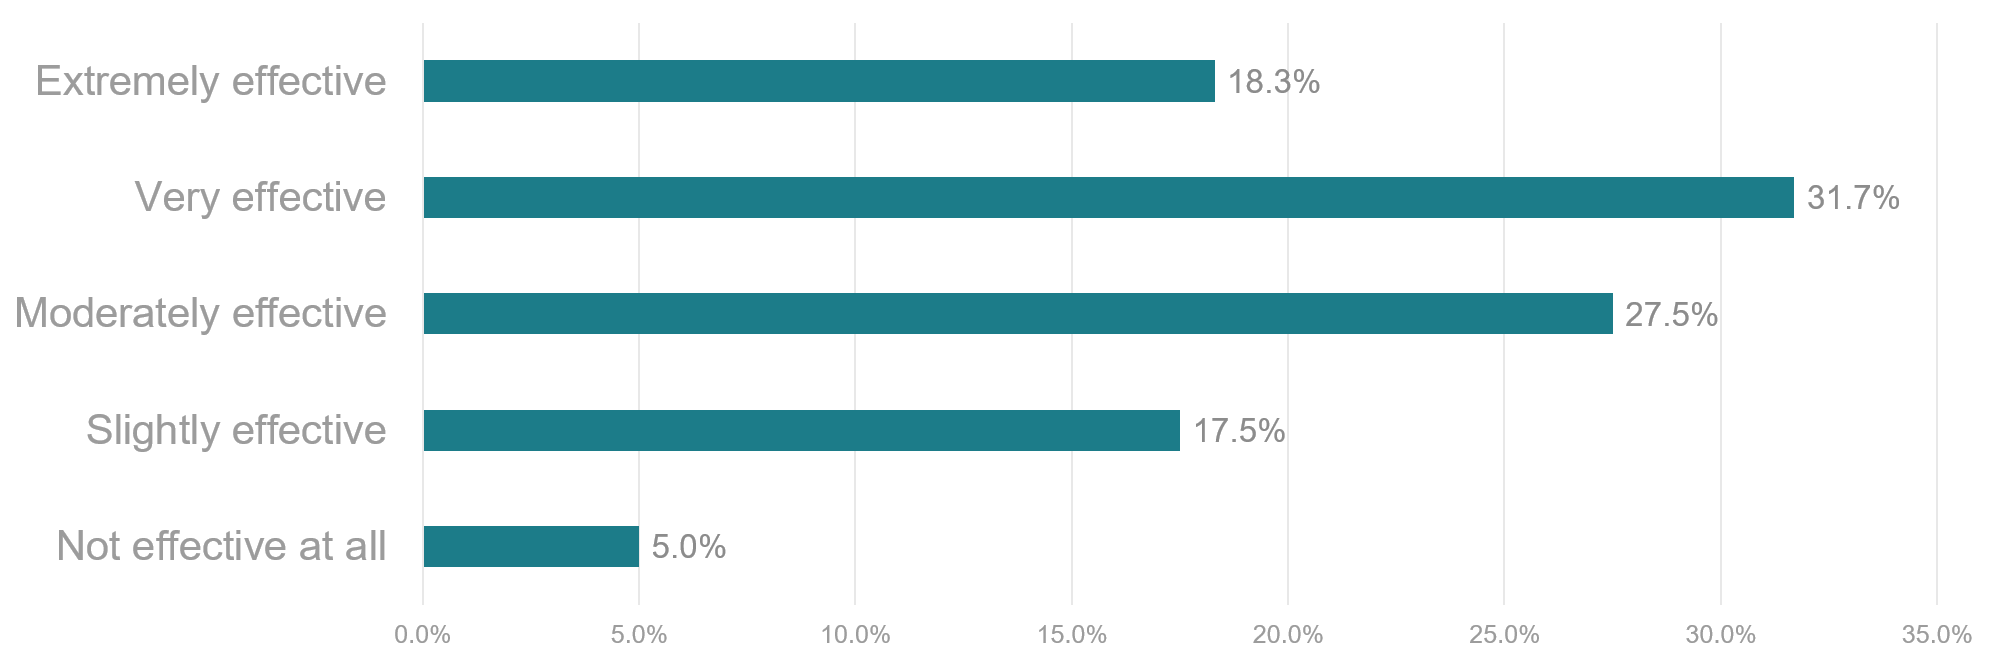 Bar chart describing survey results. 18.3% found communications extremely effective, 31.7% very effective, 37.5% moderately effective, 17.5% slightly effective, and 5.0% not effective at all. 